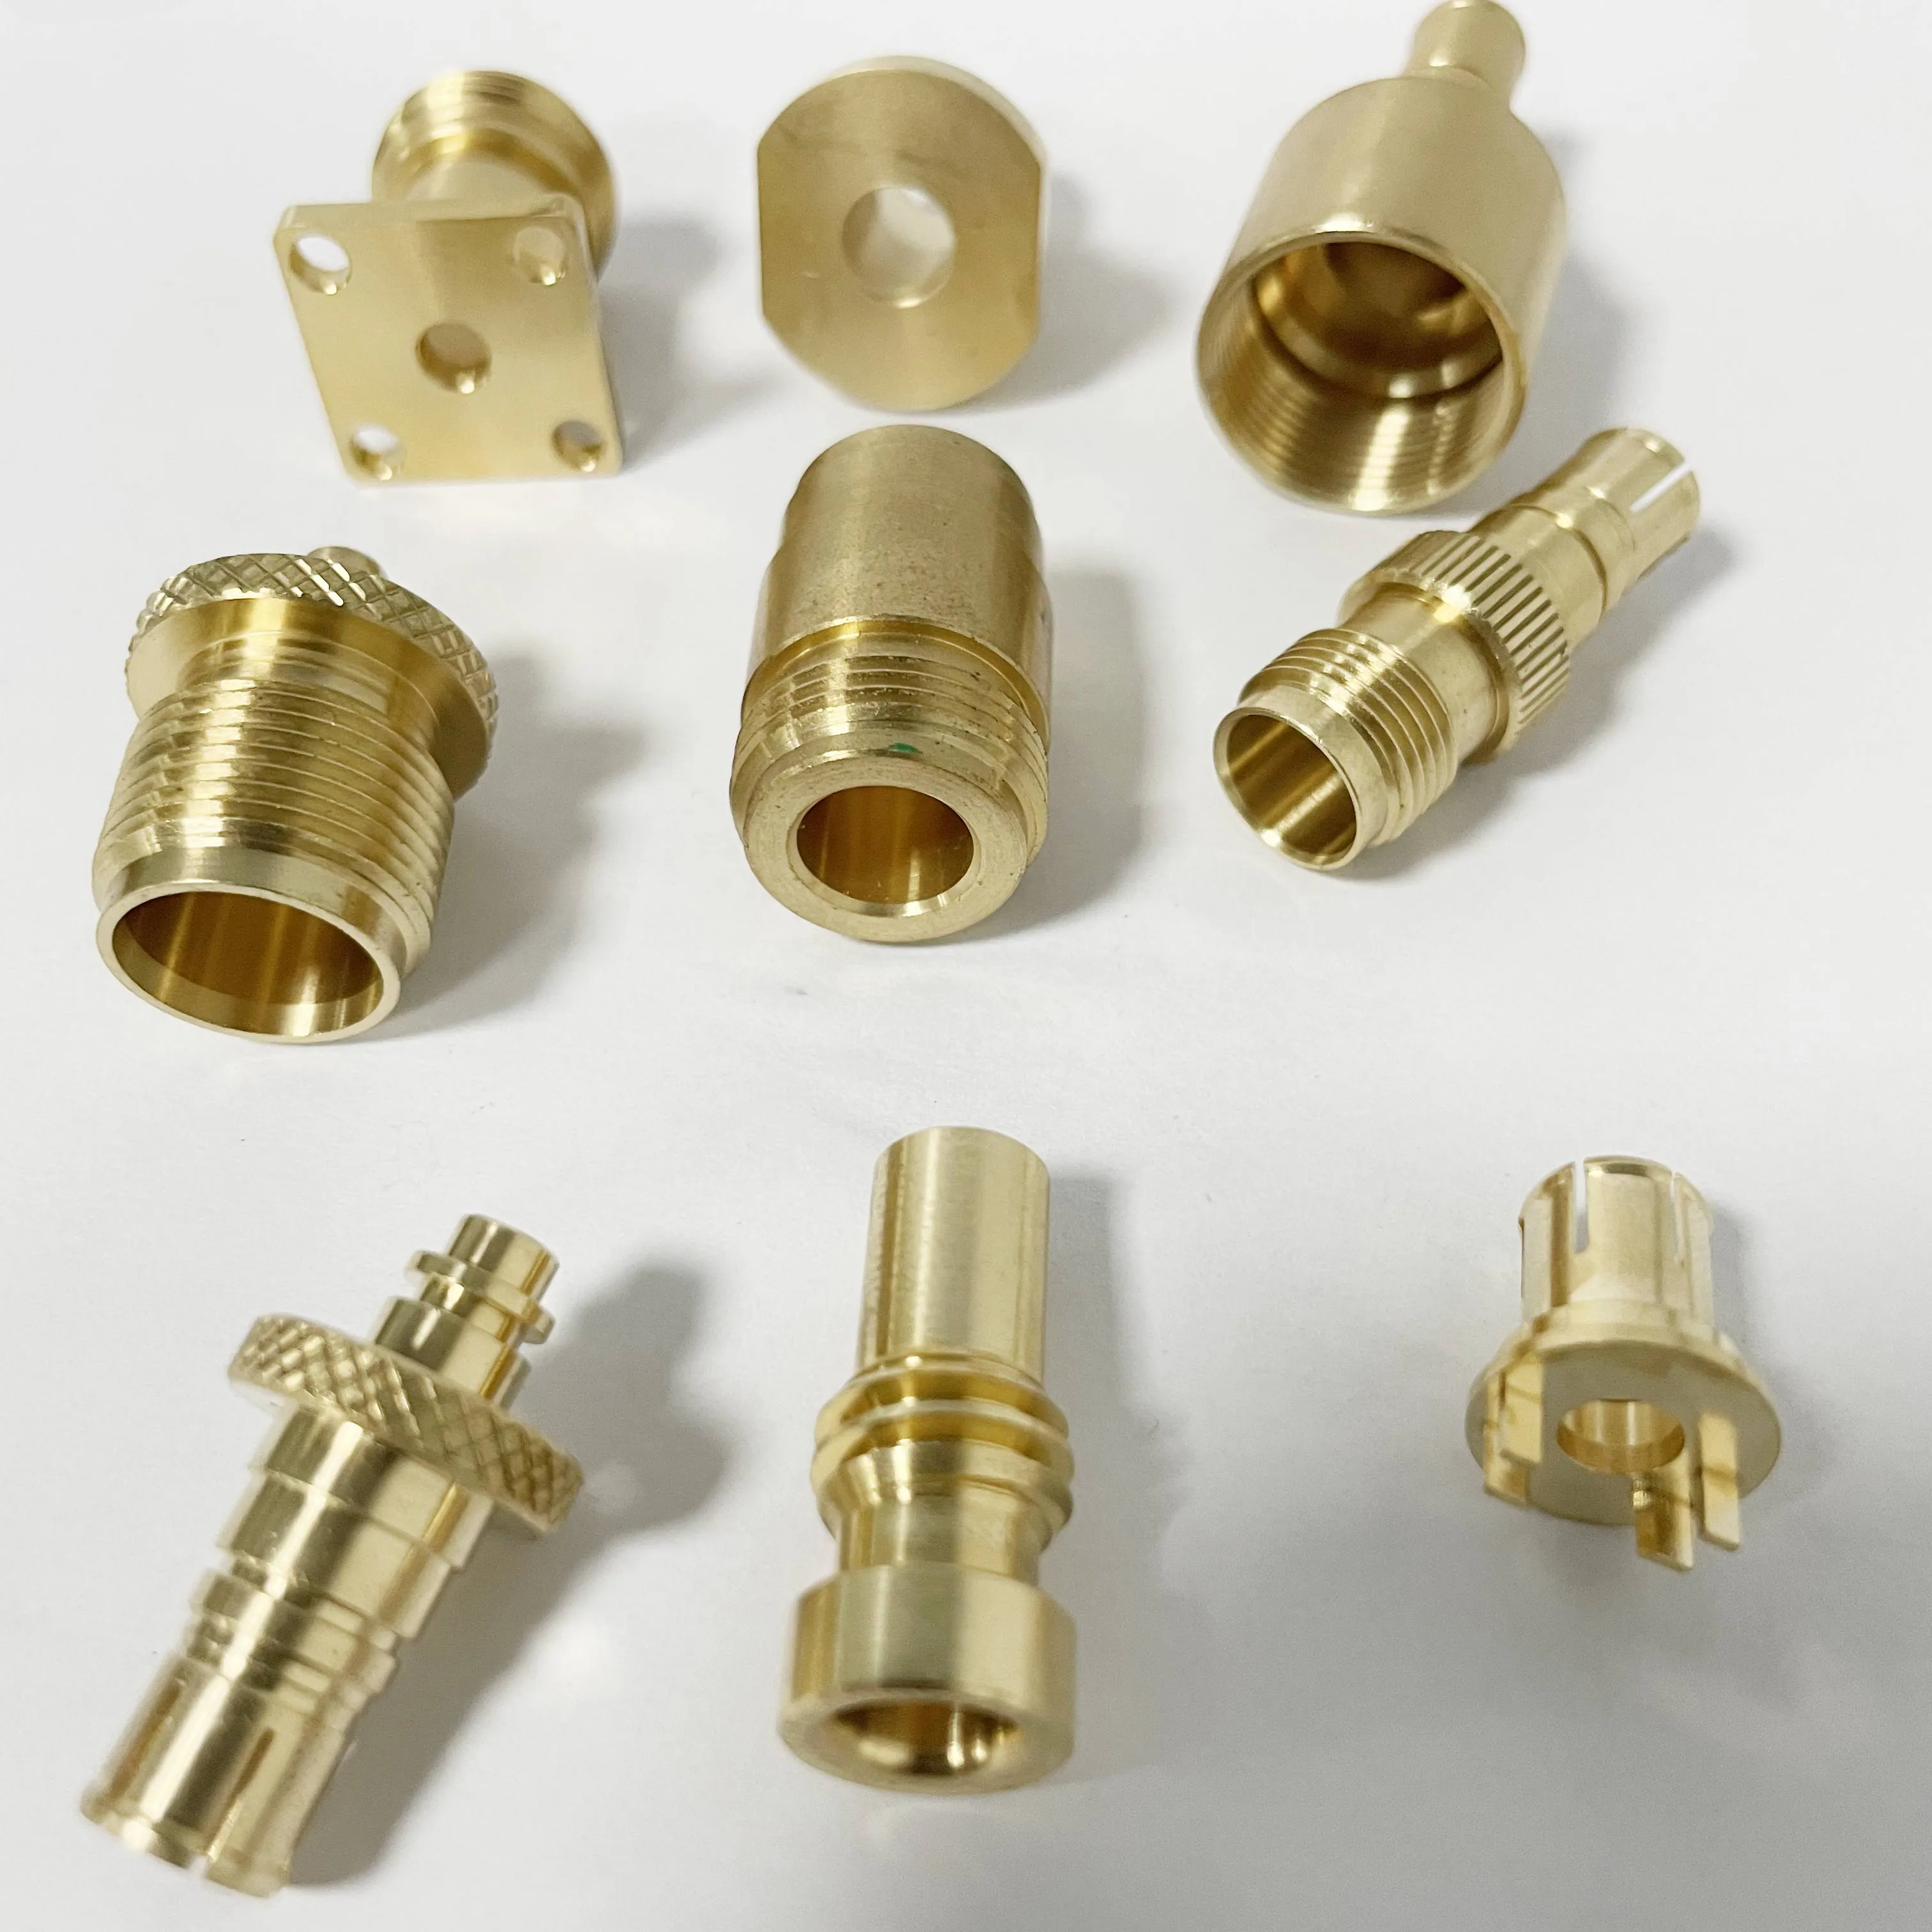 Dongguan Manufacturing Precision Hardware Non-standard Processed Brass Parts